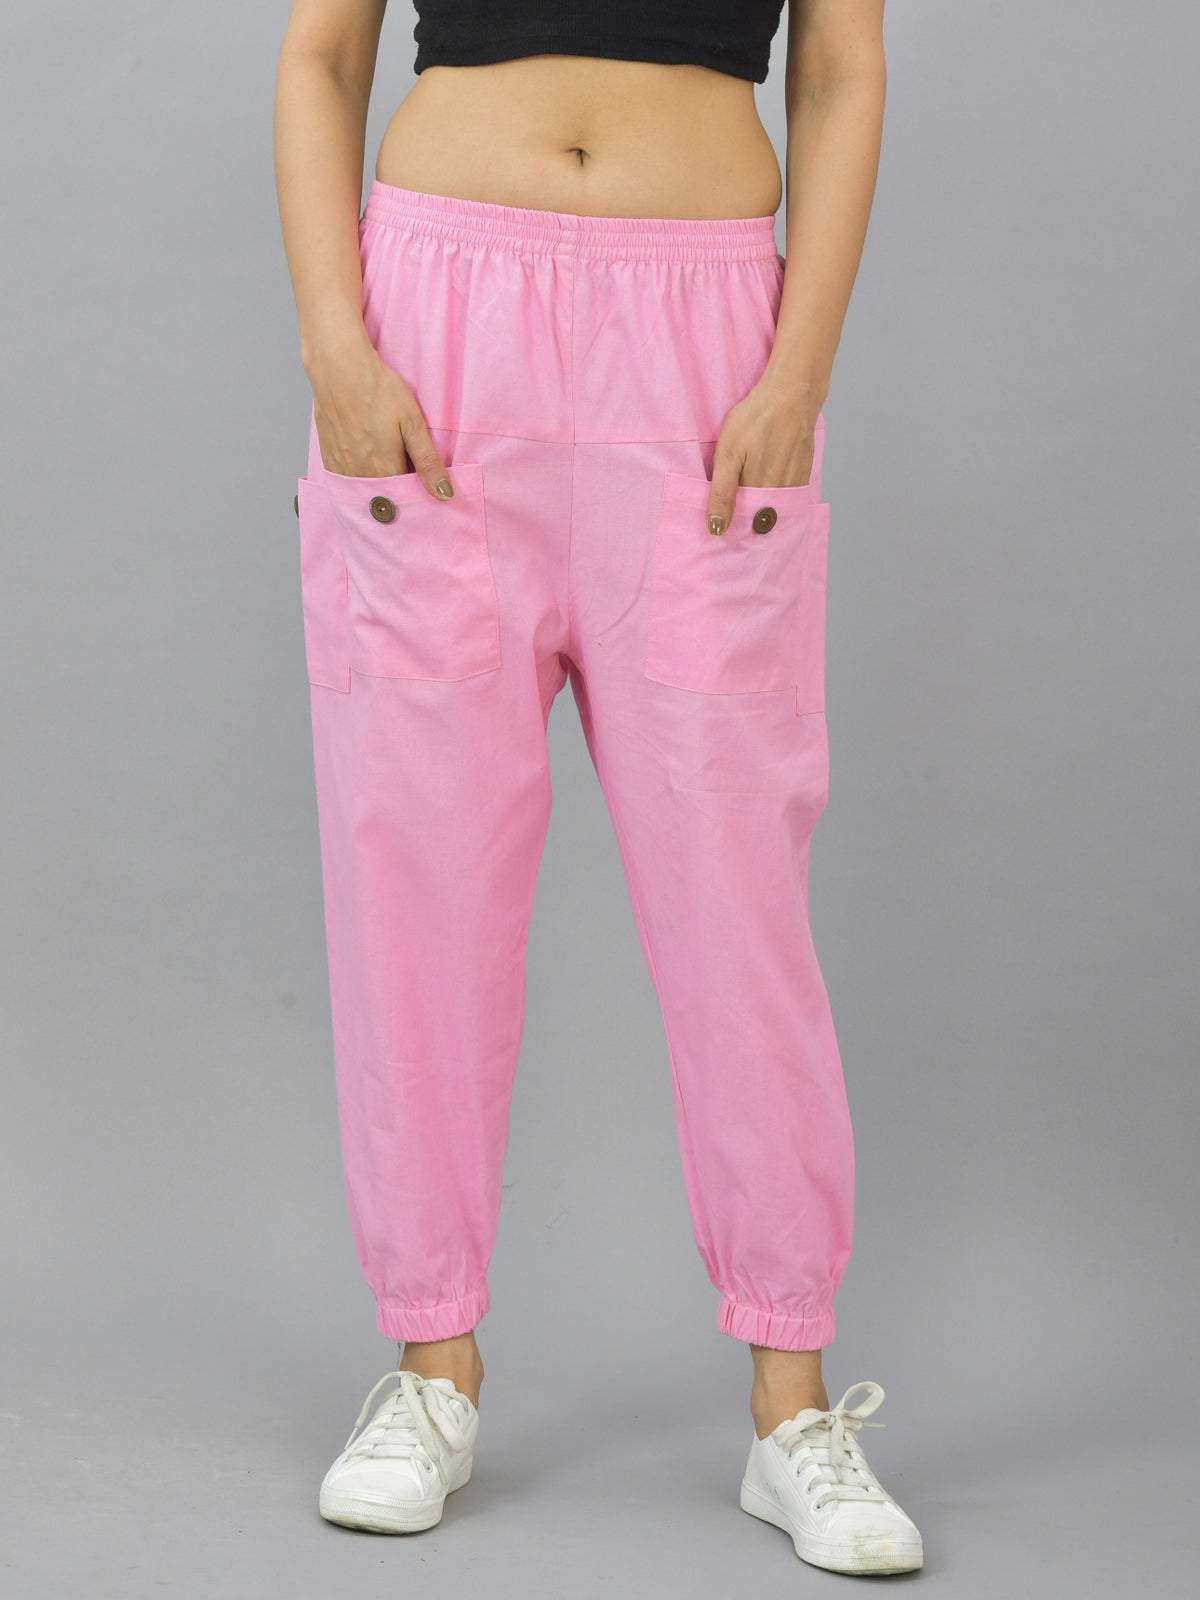 Combo Pack Of Womens Dark Green And Pink Four Pocket Cotton Cargo Pants